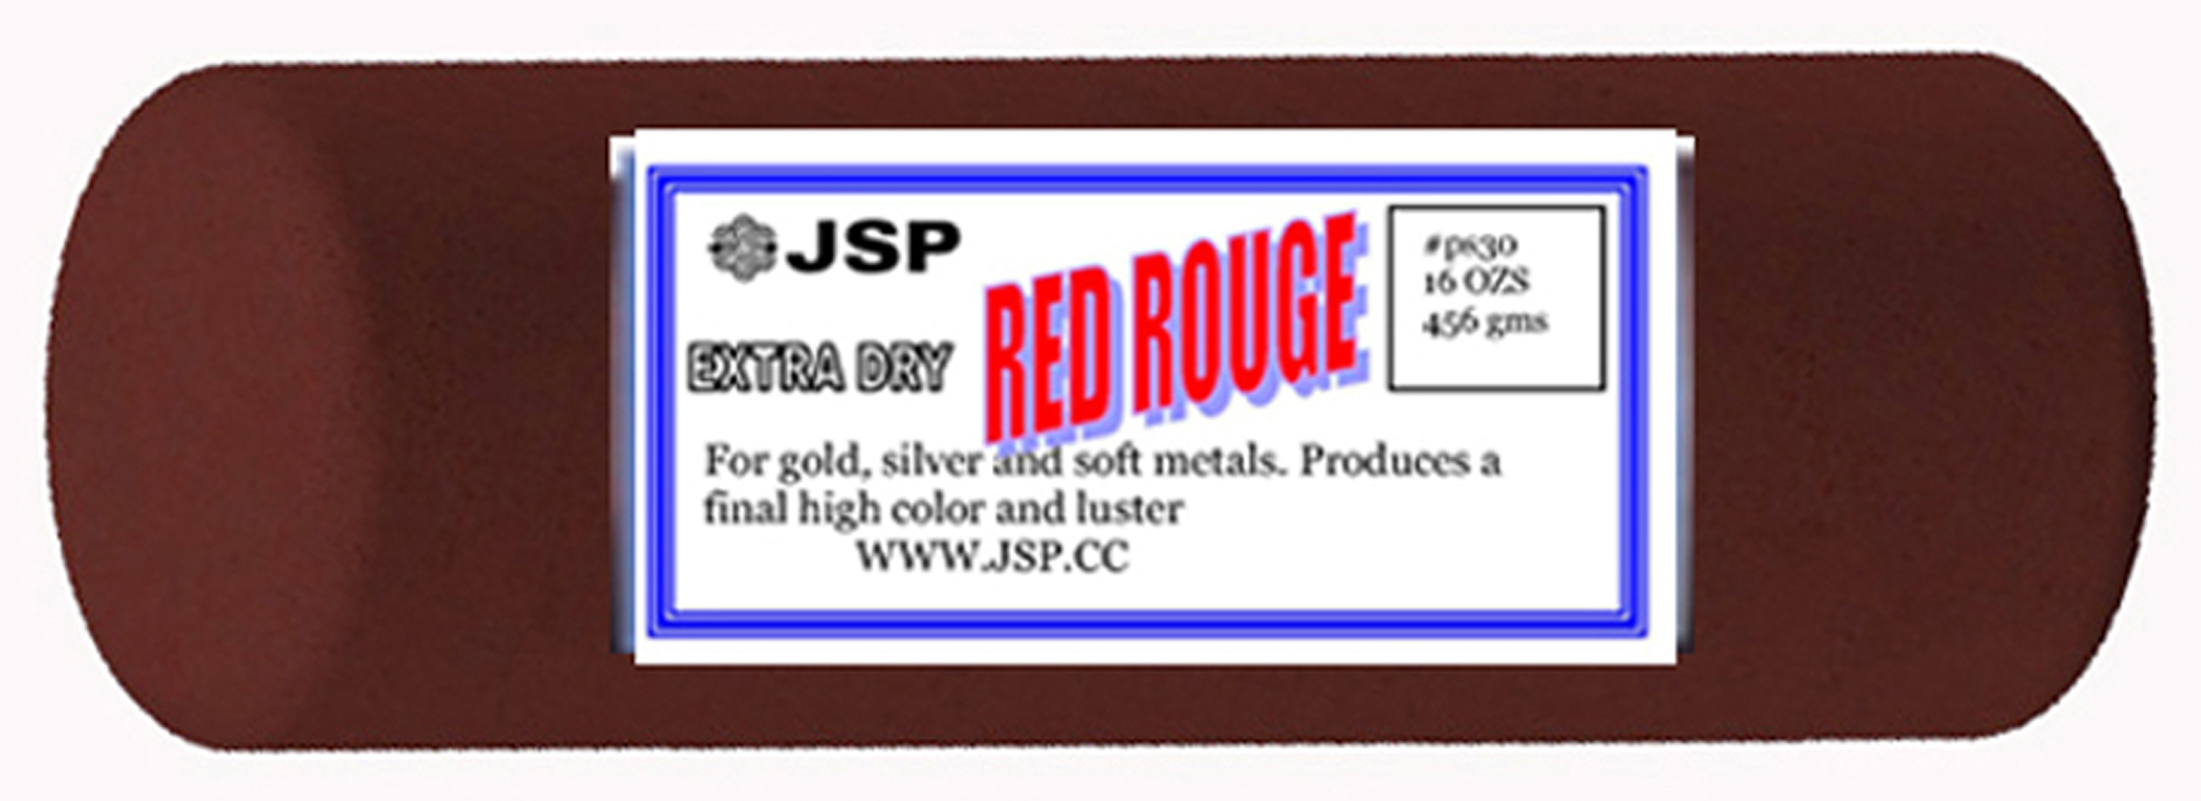 RED ROUGE BAR ROUND 1/4LB - Click Image to Close